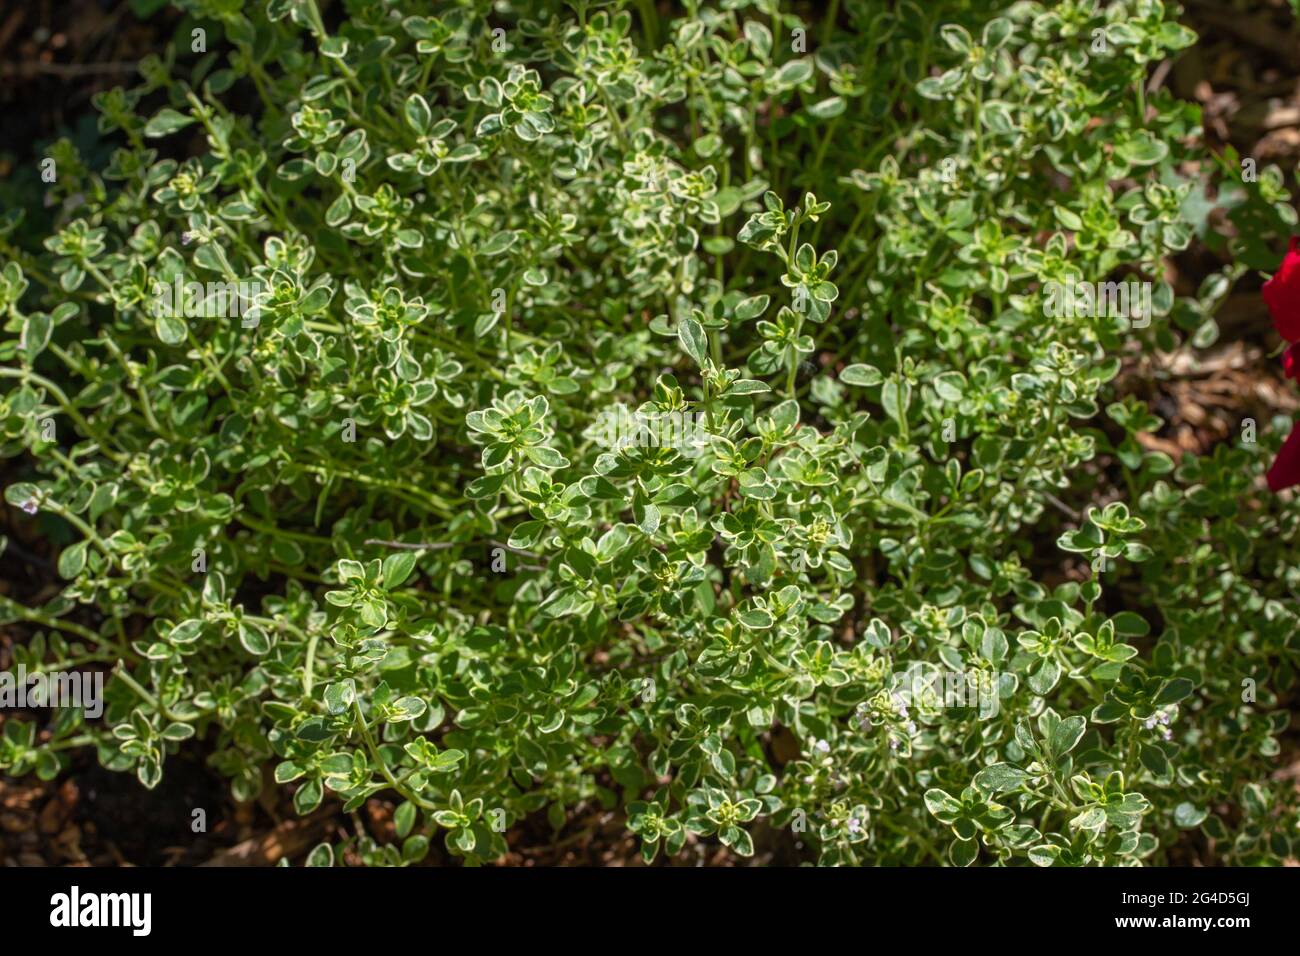 Close-up view of a variegated lemon thyme (thymus citriodorus) herb plant in a sunny herb garden with cedar bark mulch Stock Photo